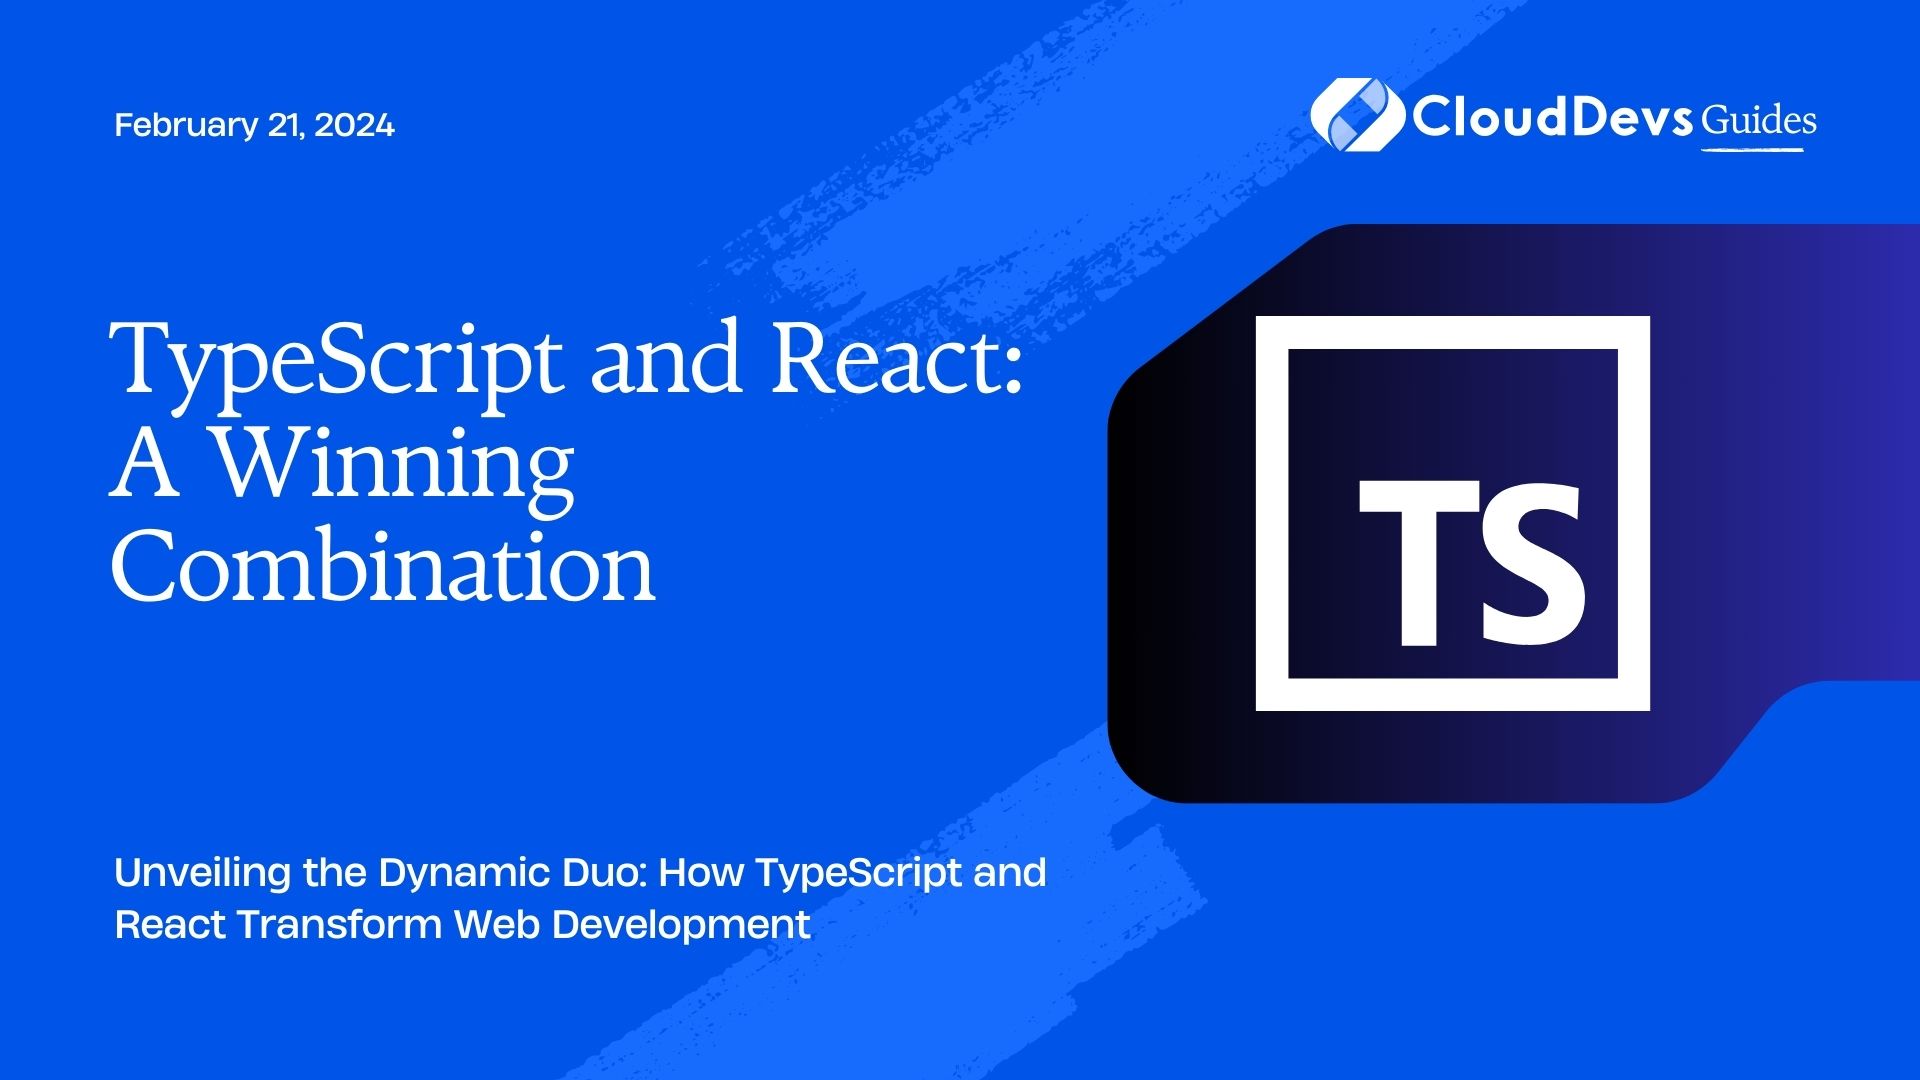 TypeScript and React: A Winning Combination